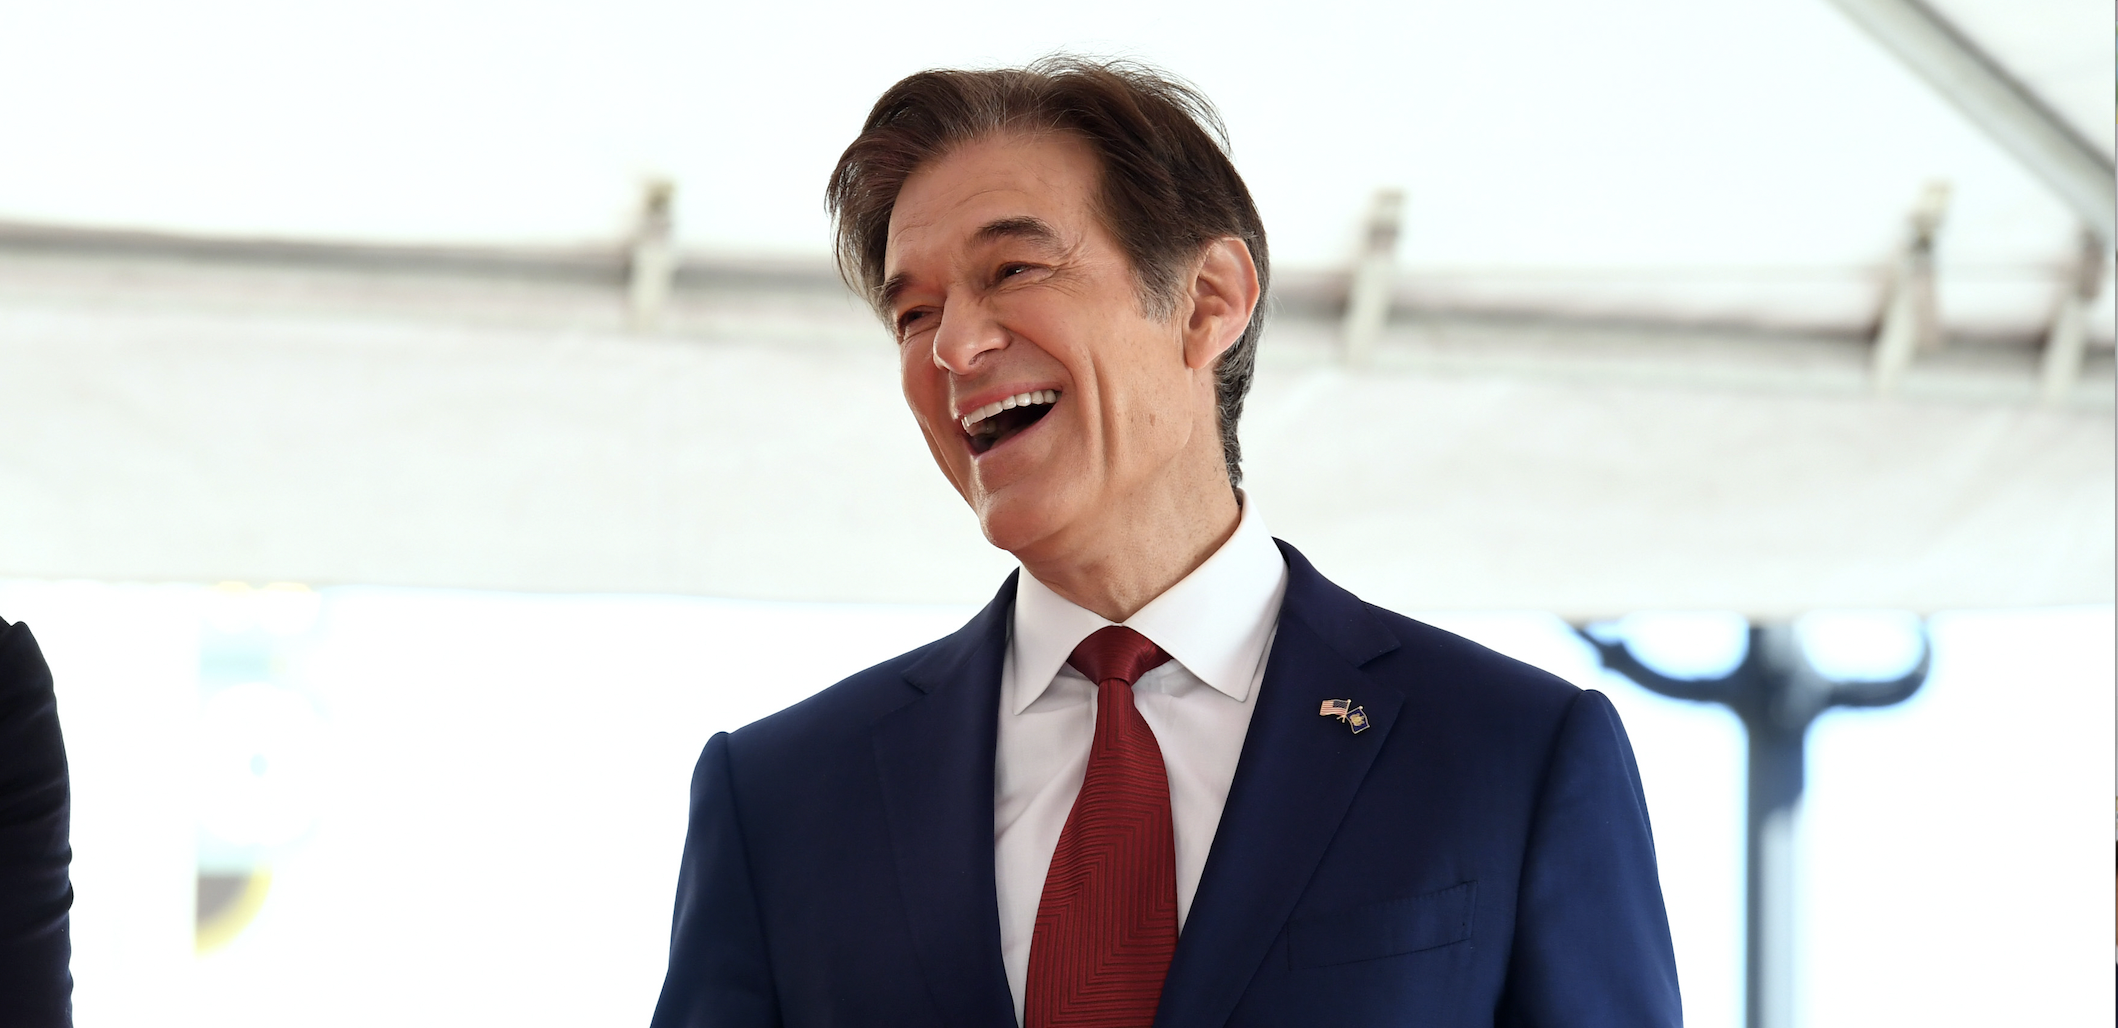 Dr Oz Raises Eyebrows Swearing To Defend The Sanctity Of Life